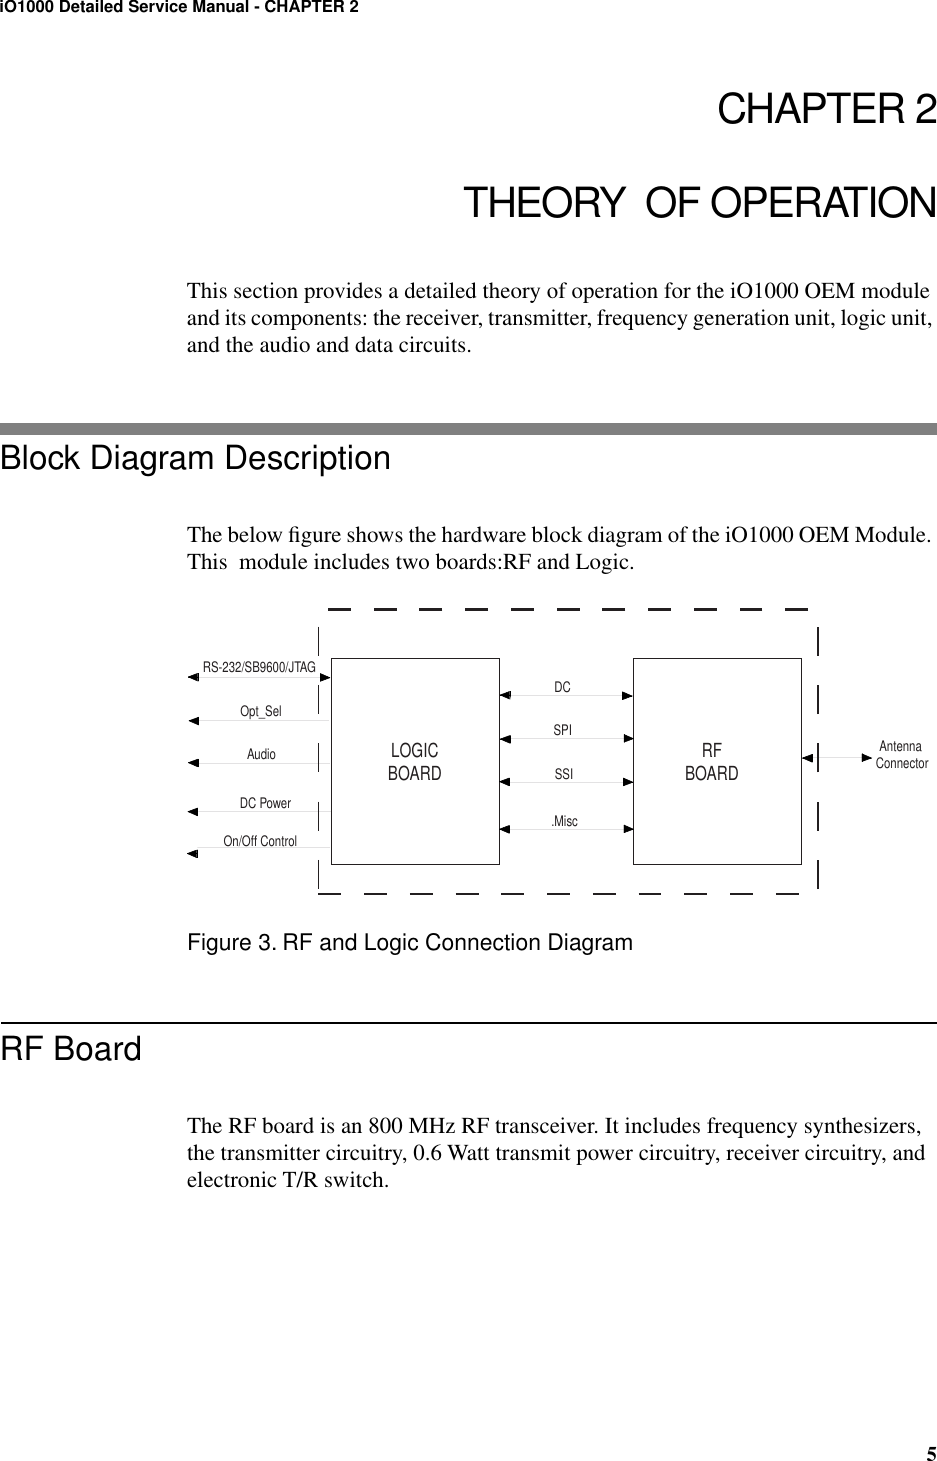  5 iO1000 Detailed Service Manual - CHAPTER 2 CHAPTER 2THEORY  OF OPERATION This section provides a detailed theory of operation for the iO1000 OEM module and its components: the receiver, transmitter, frequency generation unit, logic unit, and the audio and data circuits. Block Diagram Description The below ﬁgure shows the hardware block diagram of the iO1000 OEM Module. This  module includes two boards:RF and Logic. Figure 3. RF and Logic Connection Diagram RF Board The RF board is an 800 MHz RF transceiver. It includes frequency synthesizers, the transmitter circuitry, 0.6 Watt transmit power circuitry, receiver circuitry, and electronic T/R switch.LOGICBOARD RFBOARDRS-232/SB9600/JTAGOpt_SelDC PowerAudioOn/Off ControlDCSPISSI.MiscAntenna Connector